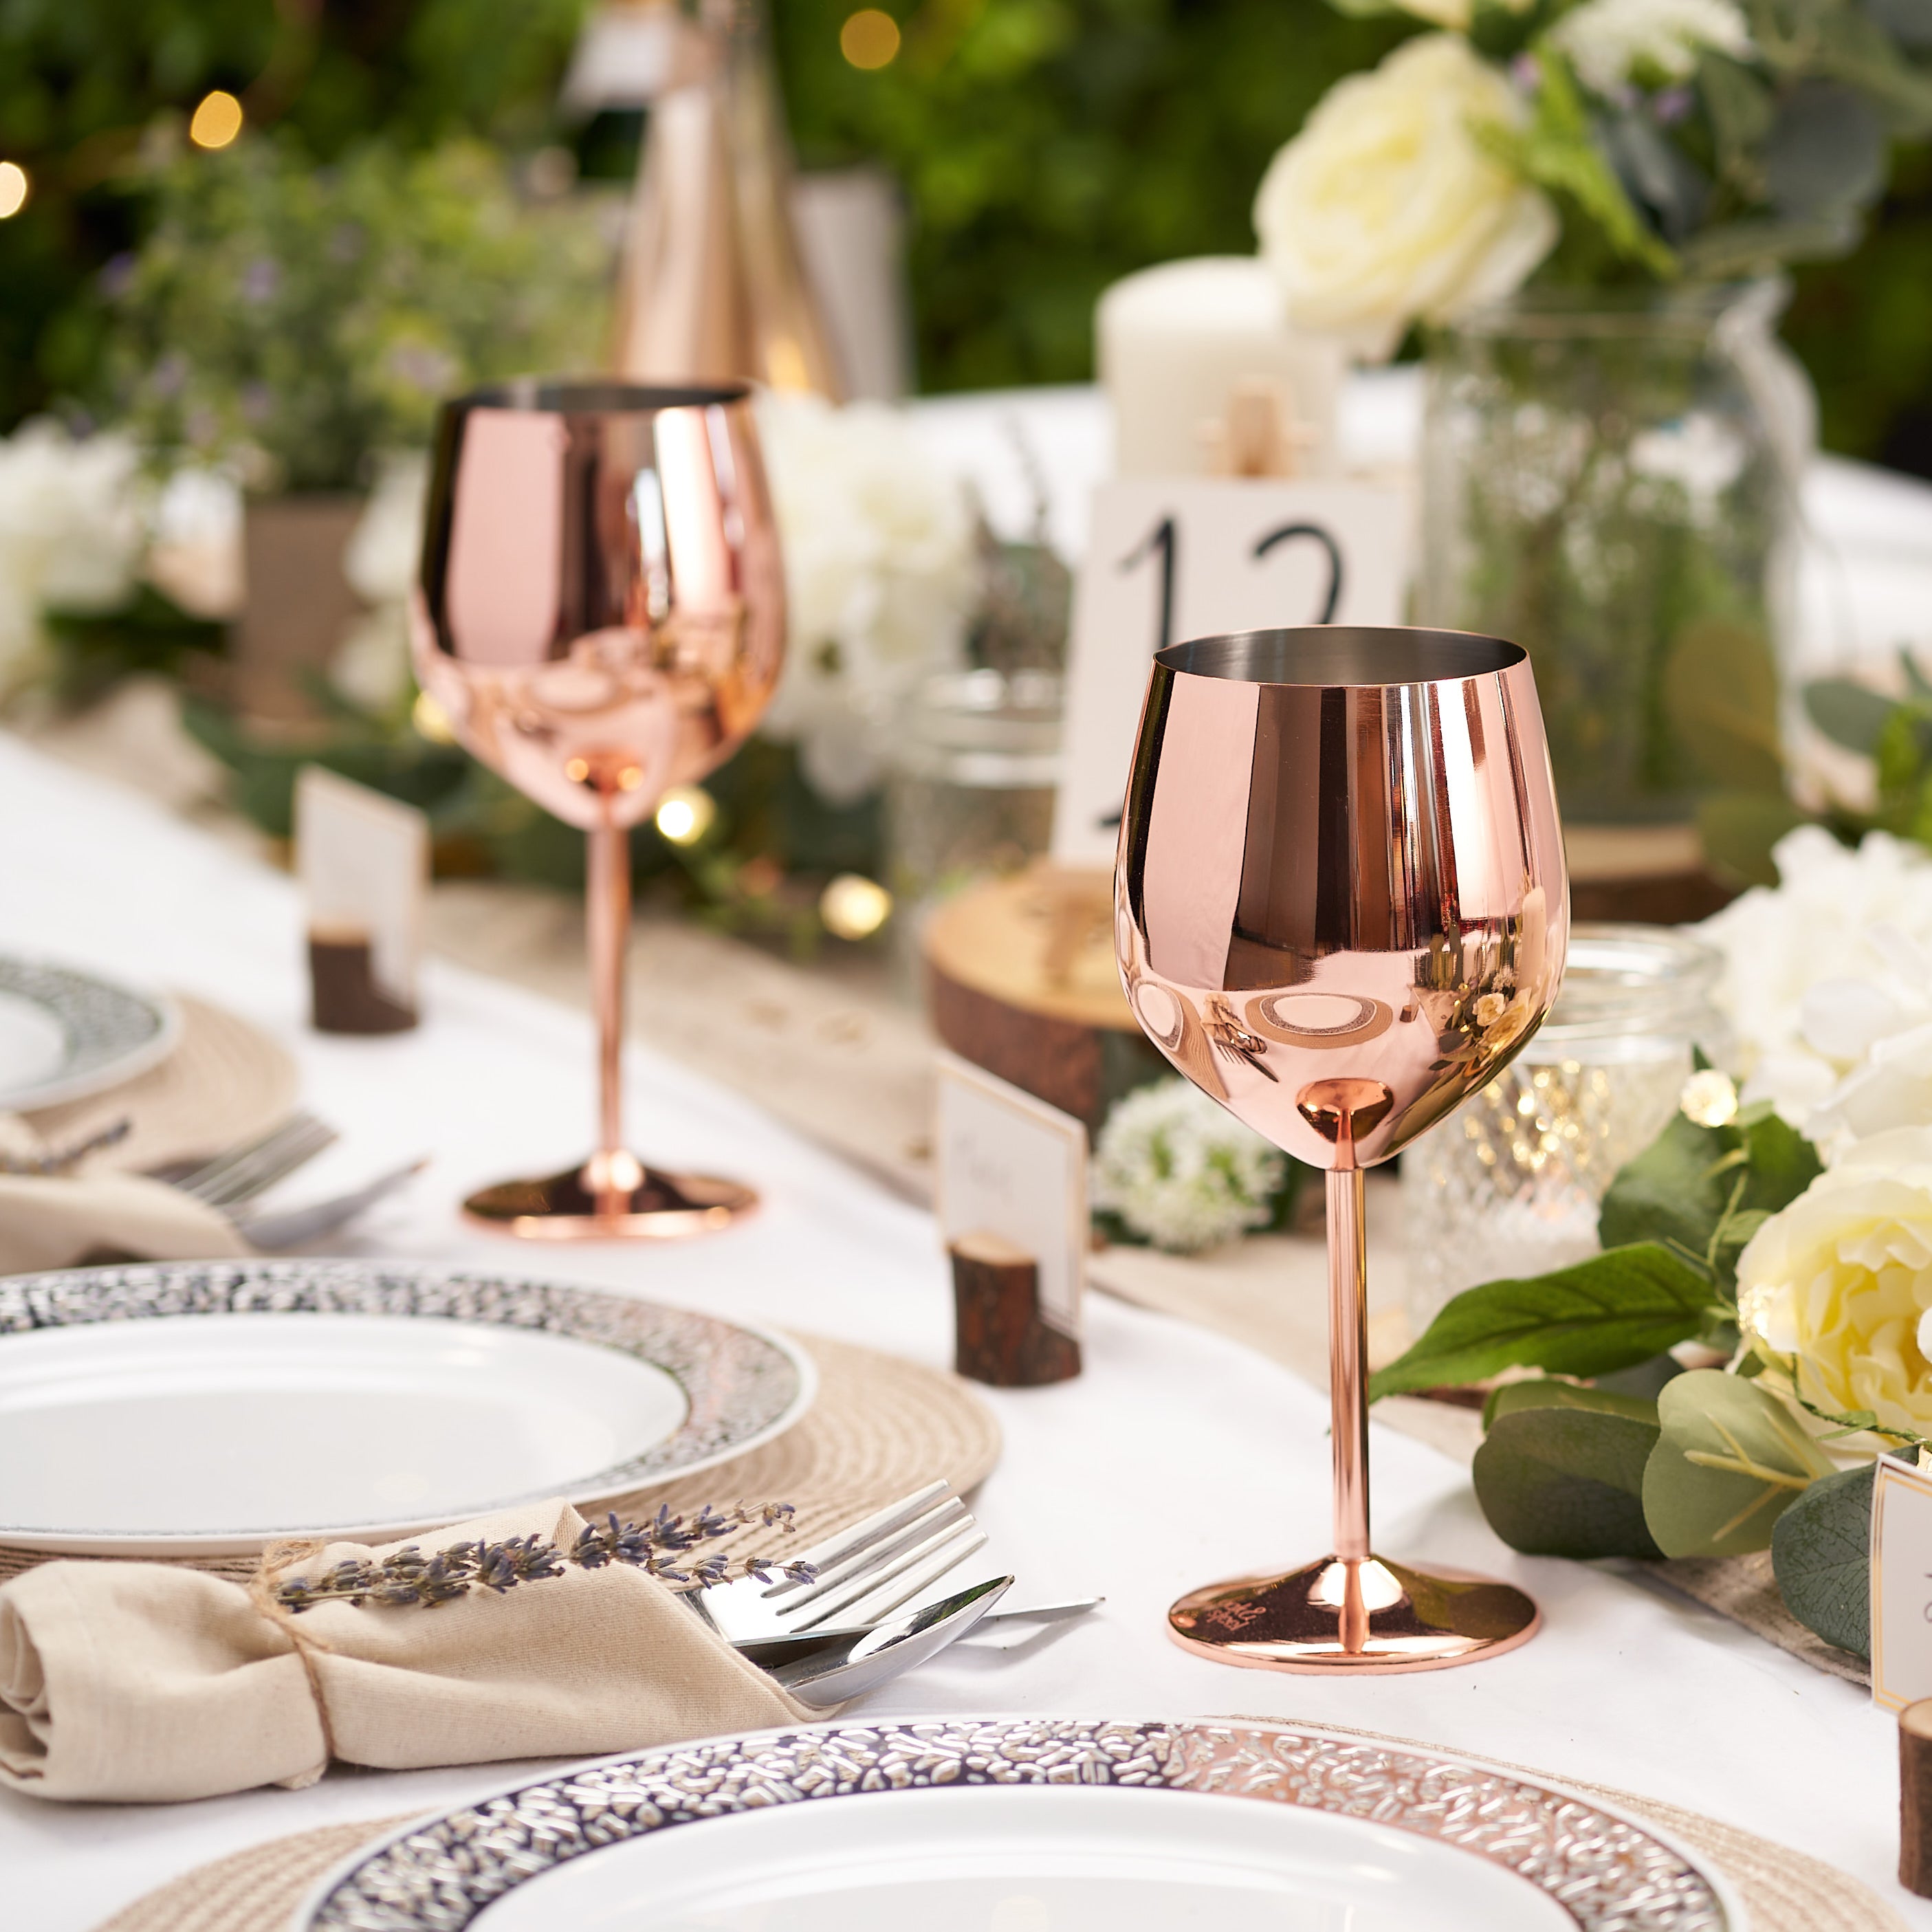 2 Rose Gold Stainless Steel Wine Glasses